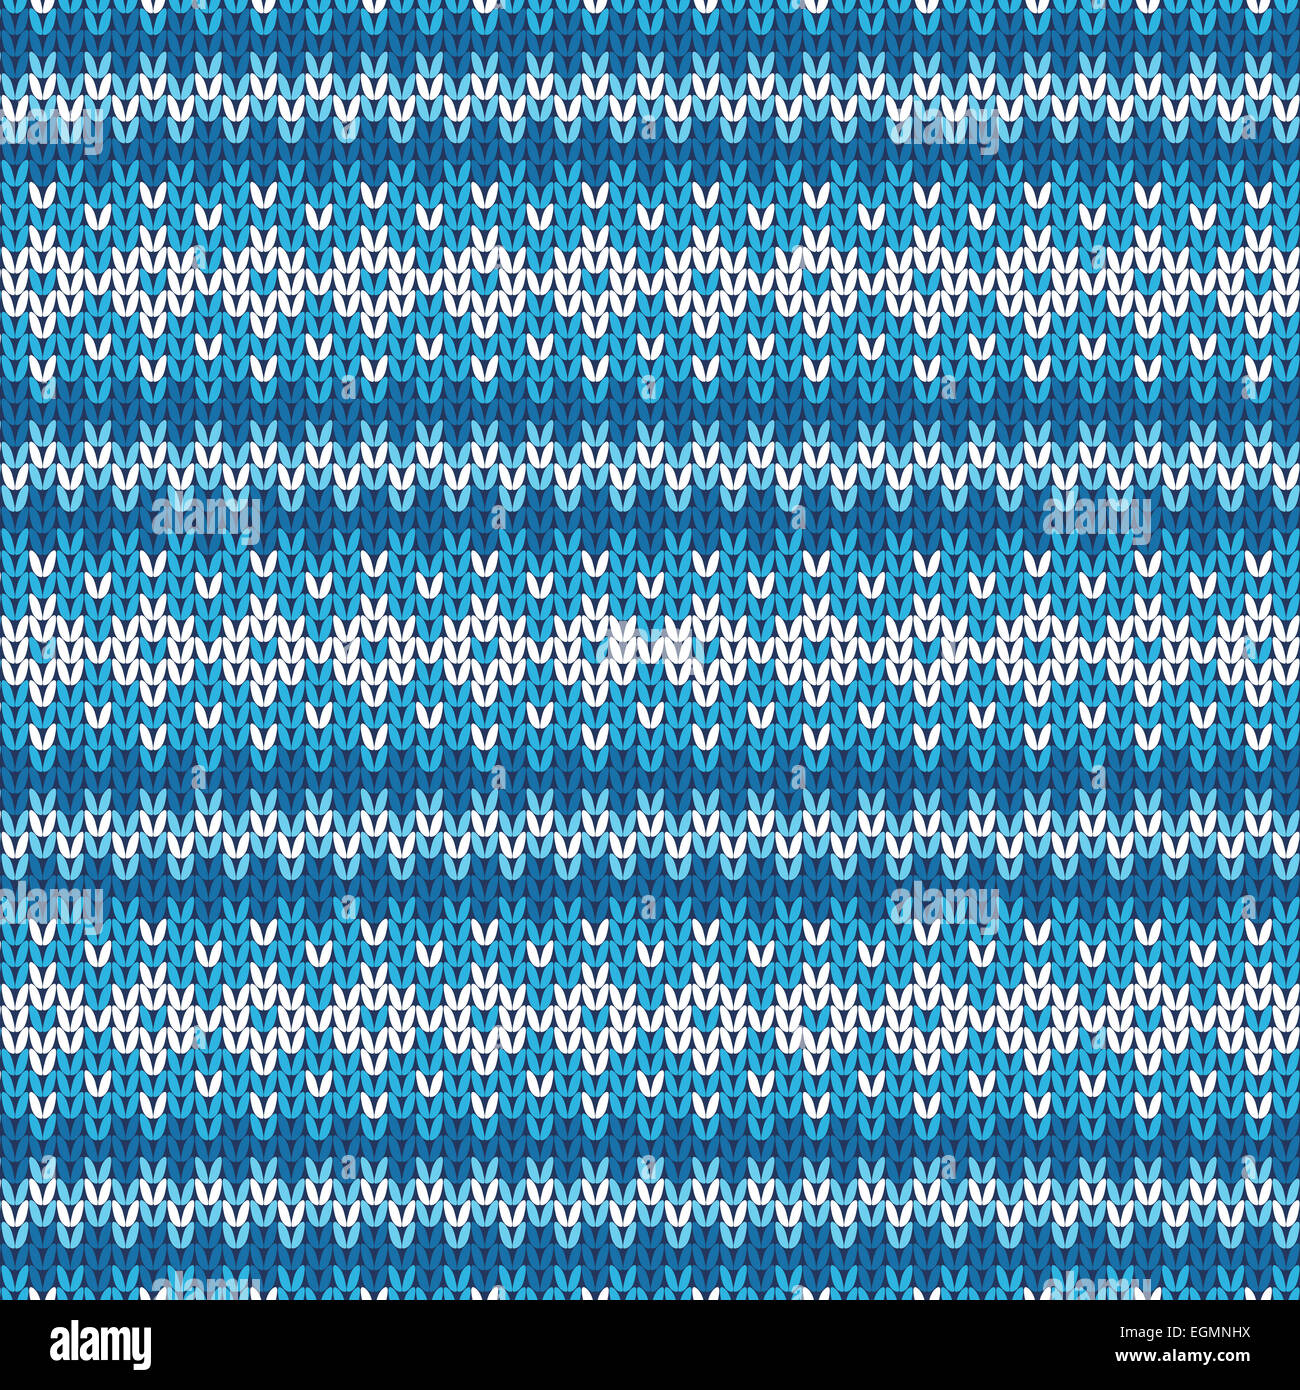 Winter Contrast Geometric Ornament Seamless Pattern in Blue and White for Merry Christmas or Happy New Year Knitted Fabric Stock Photo